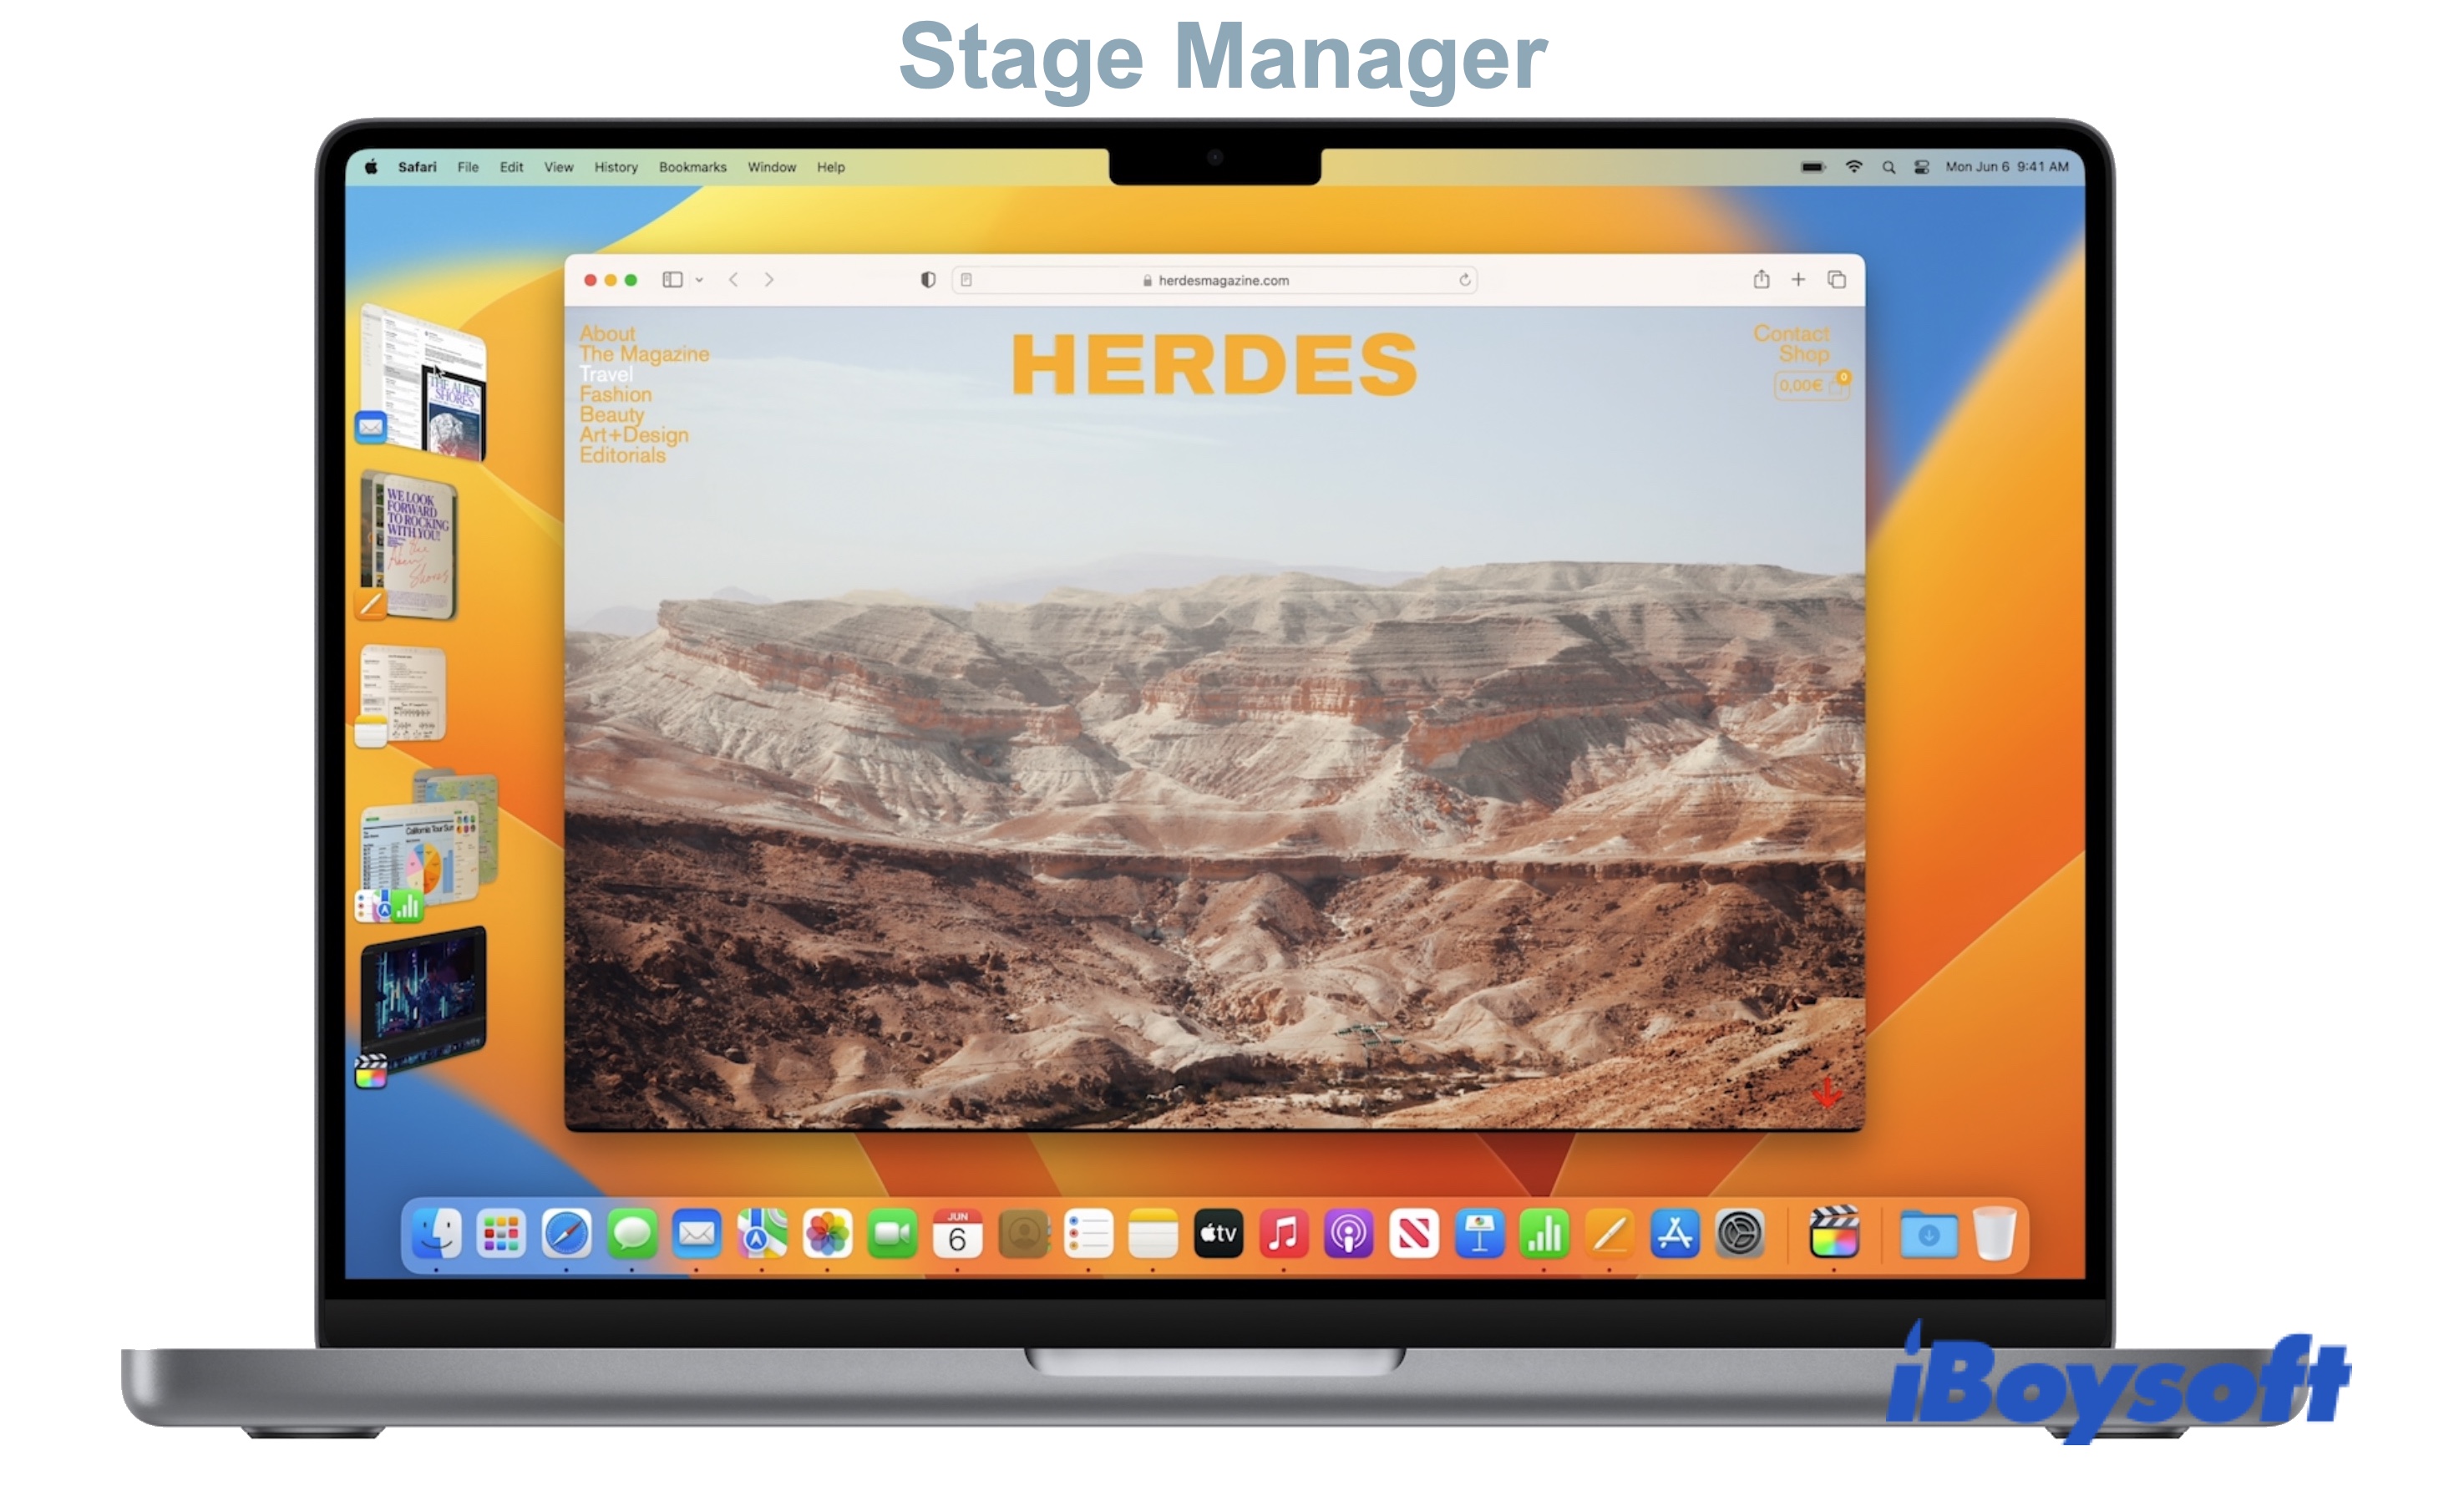 The Stage Manager in macOS Ventura